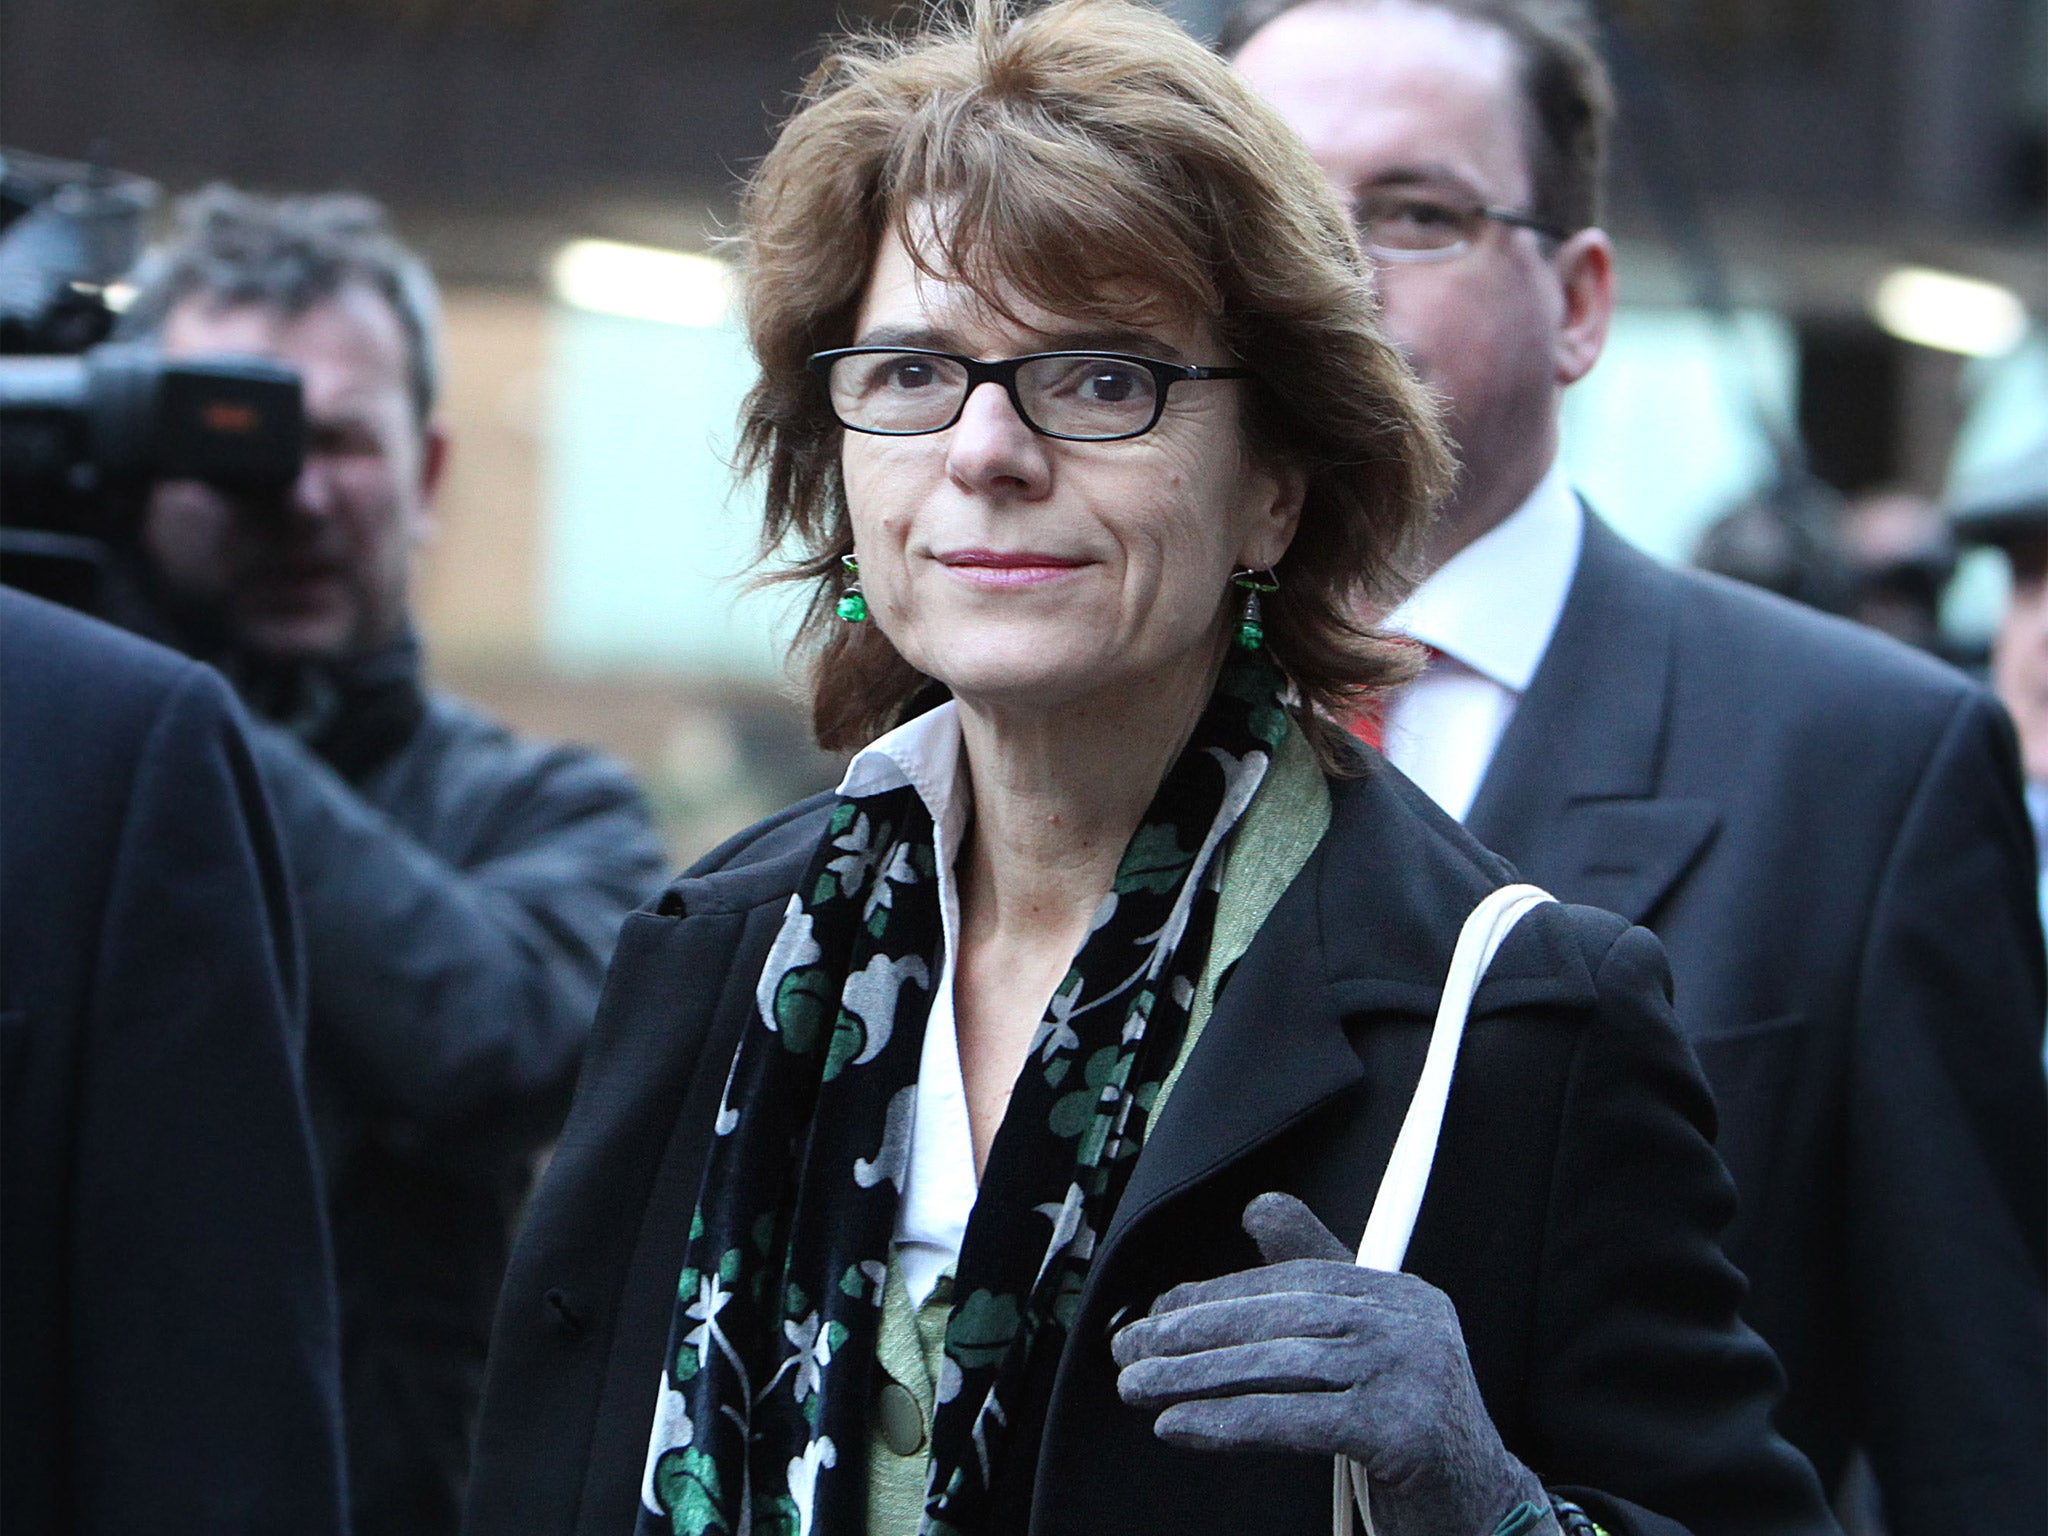 Vicky Pryce, 60, ex-wife of former Liberal Democrat MP Chris Huhne, is pictured leaving Southwark Crown